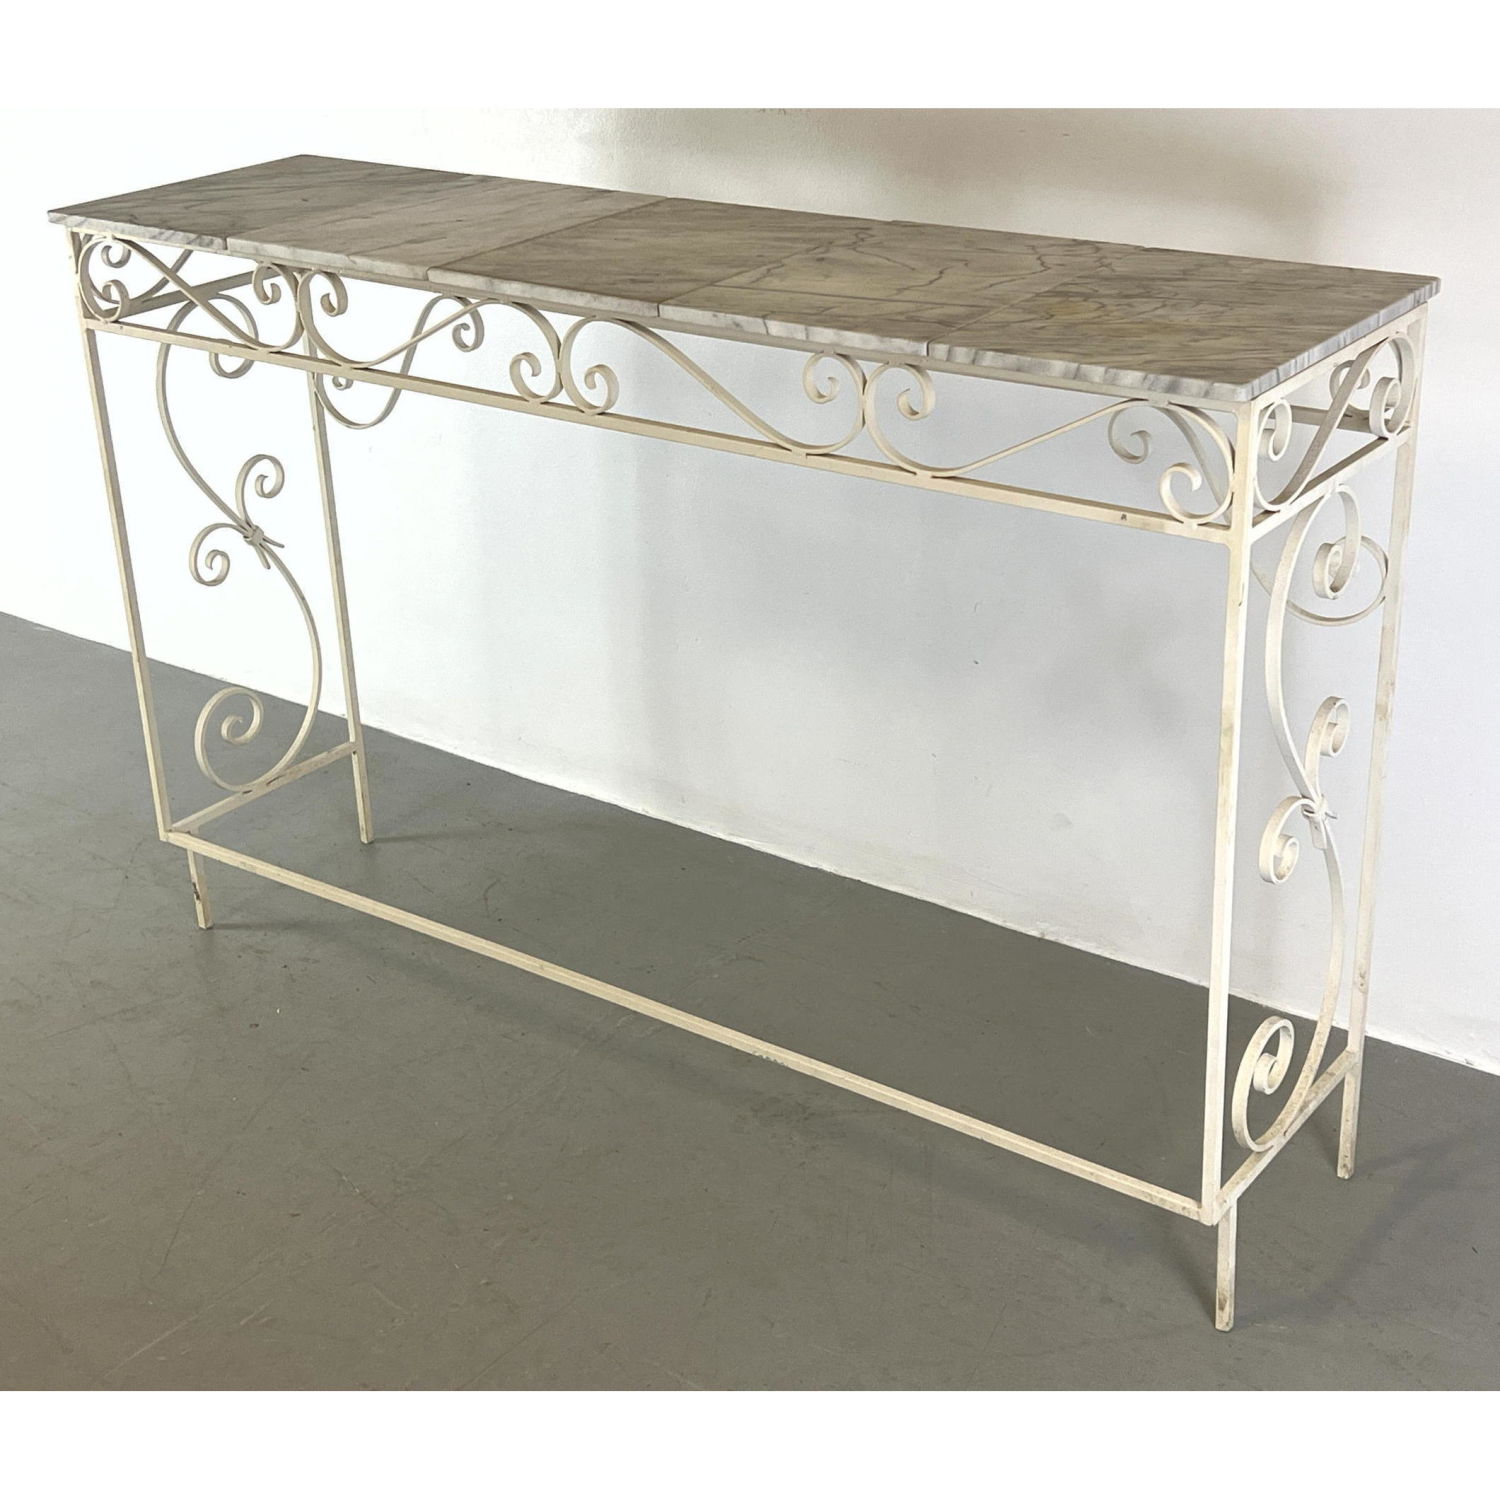 Wrought Iron and Marble Console 2ba193